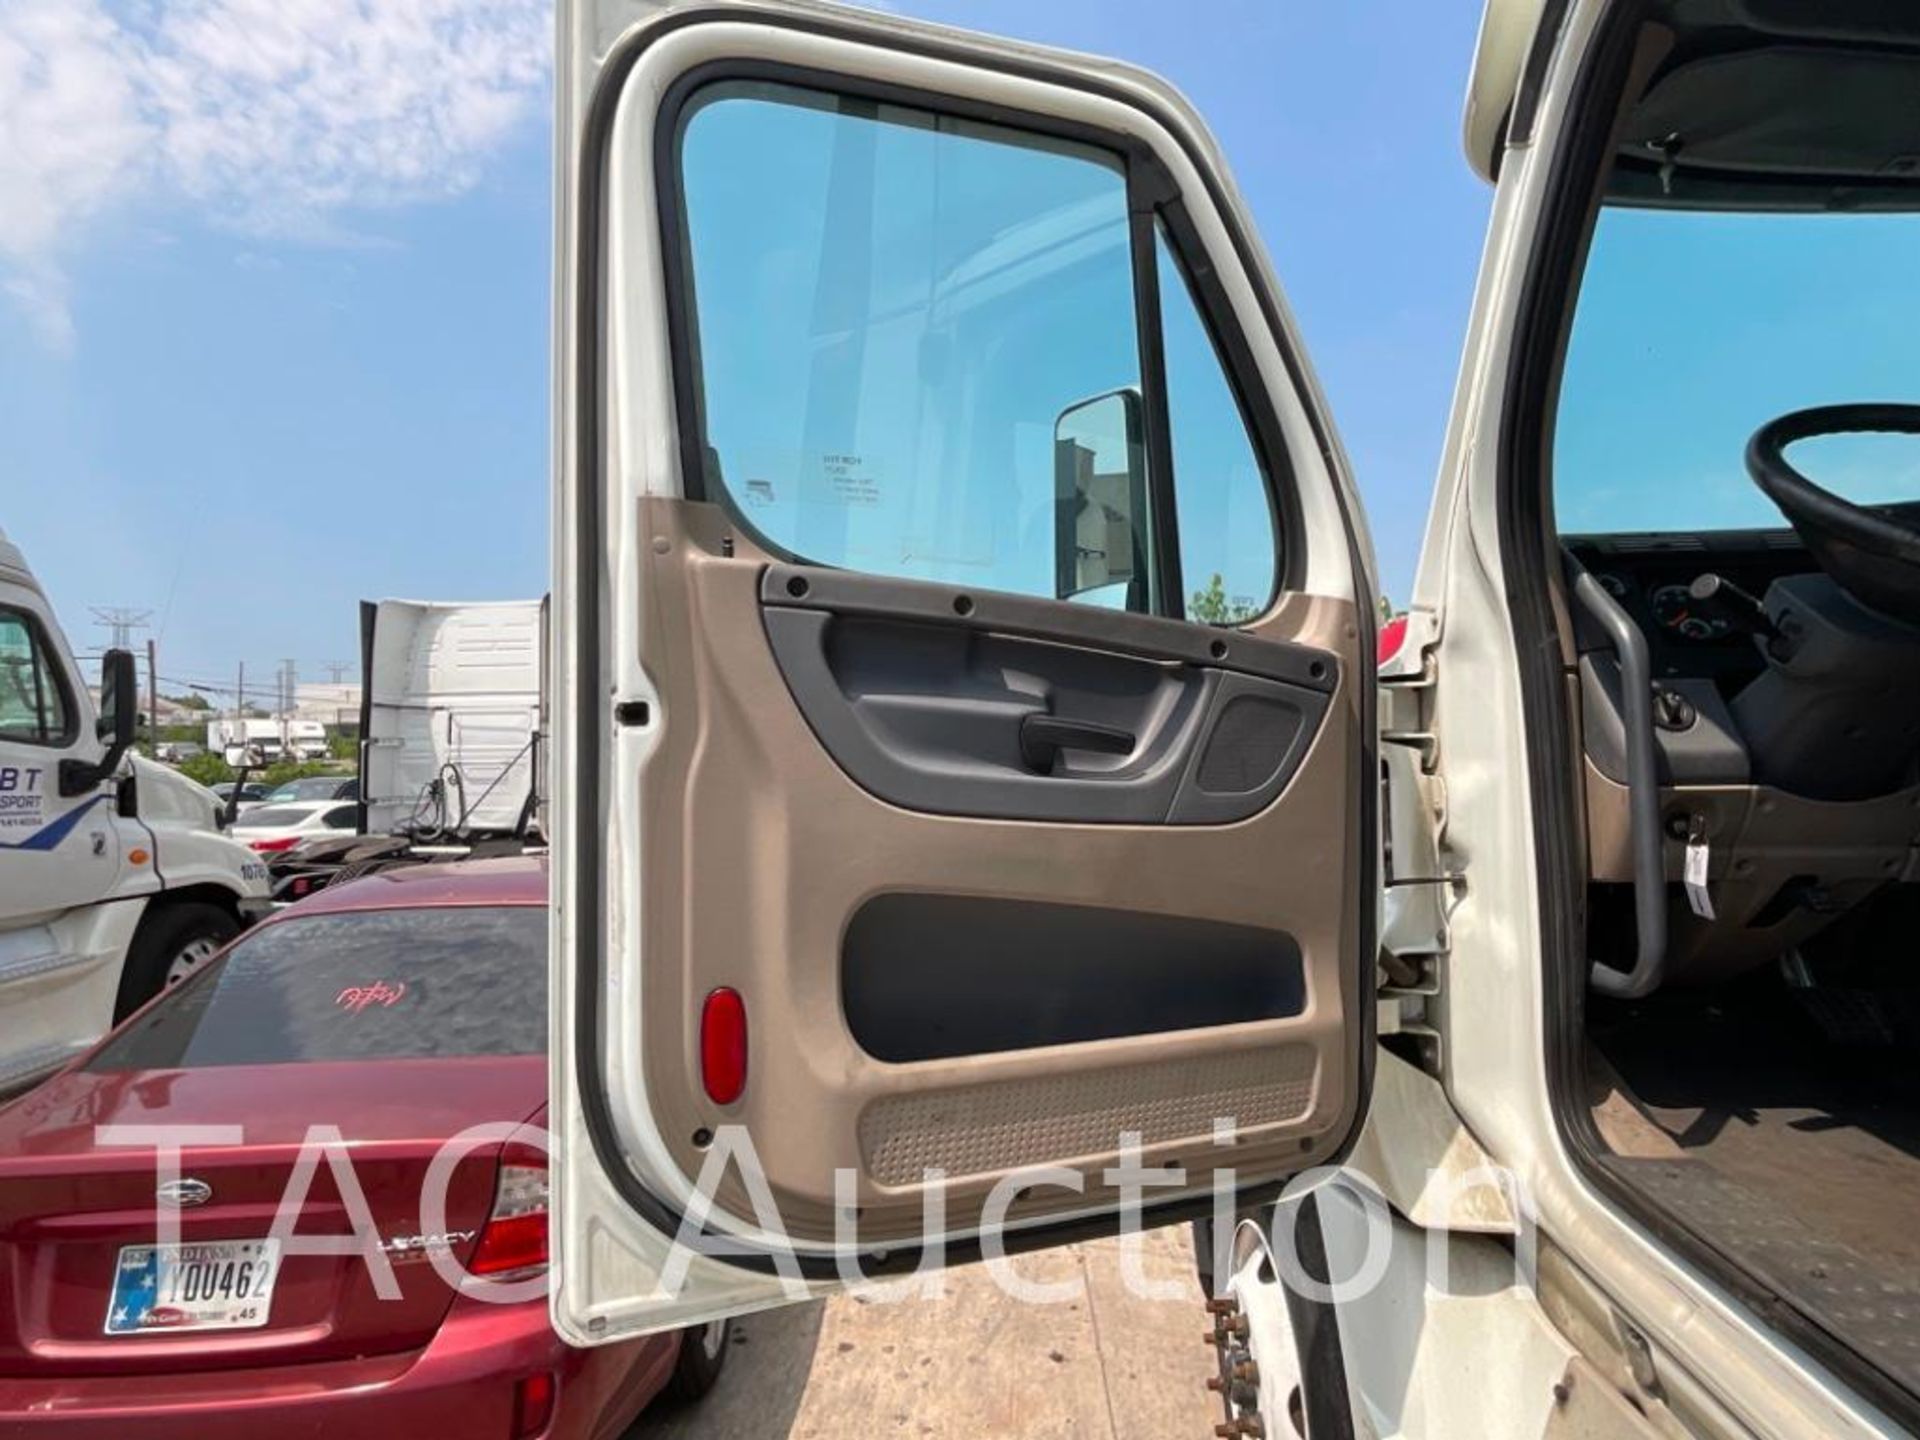 2020 Freightliner Cascadia Day Cab - Image 10 of 50